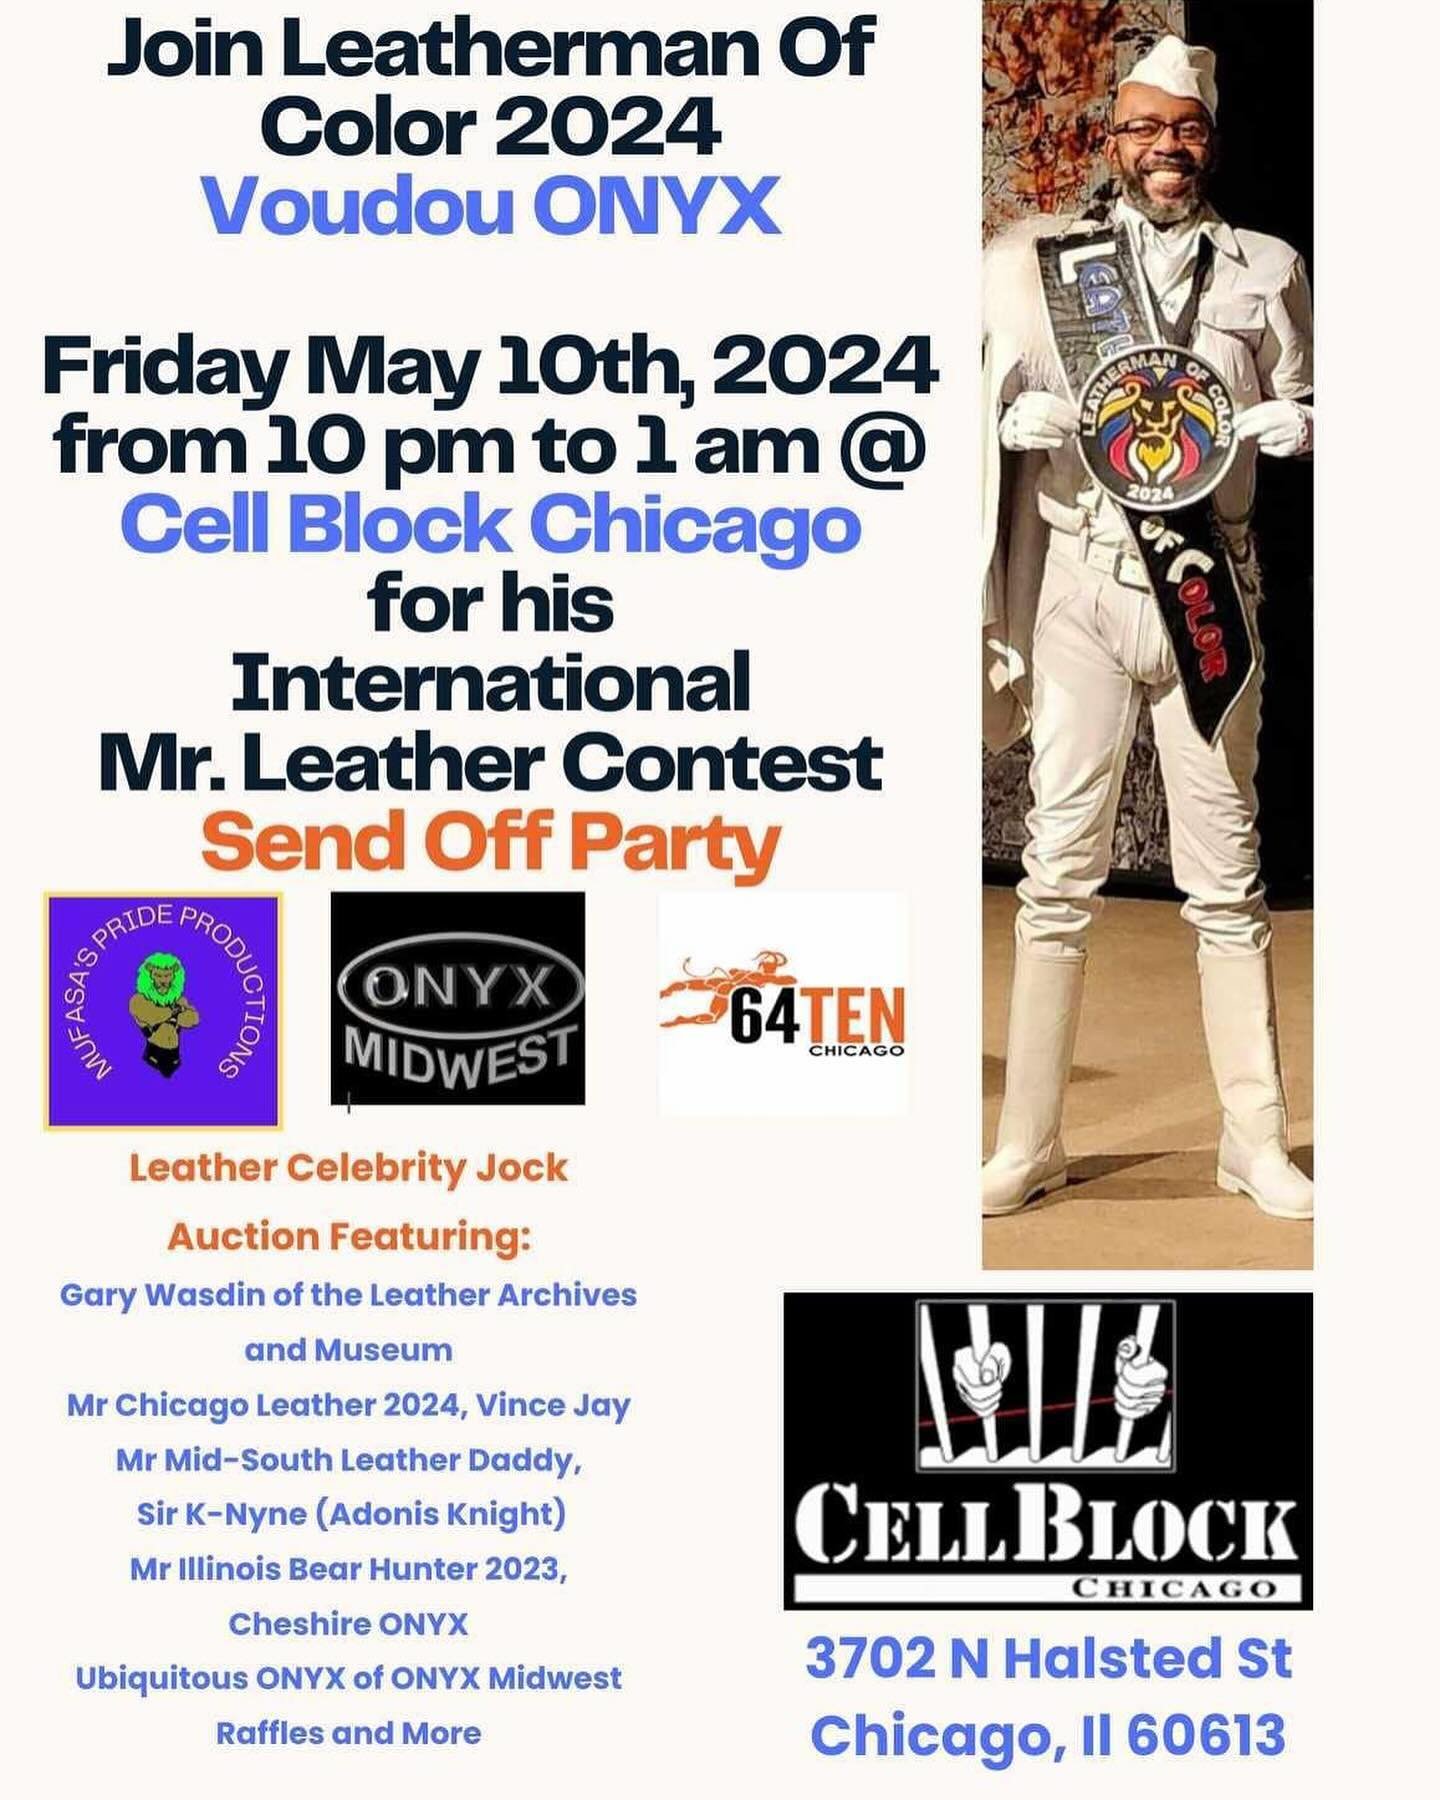 Hey Leather Family! Come out and join me in, sending off my Leather Brother, @voudou_onyx the current Leatherman of Color for IML46 next Friday at 10 PM @cellblockchi I&rsquo;ll be paraded out and my jockstrap auctioned off to a lucky winner 😉

#iml